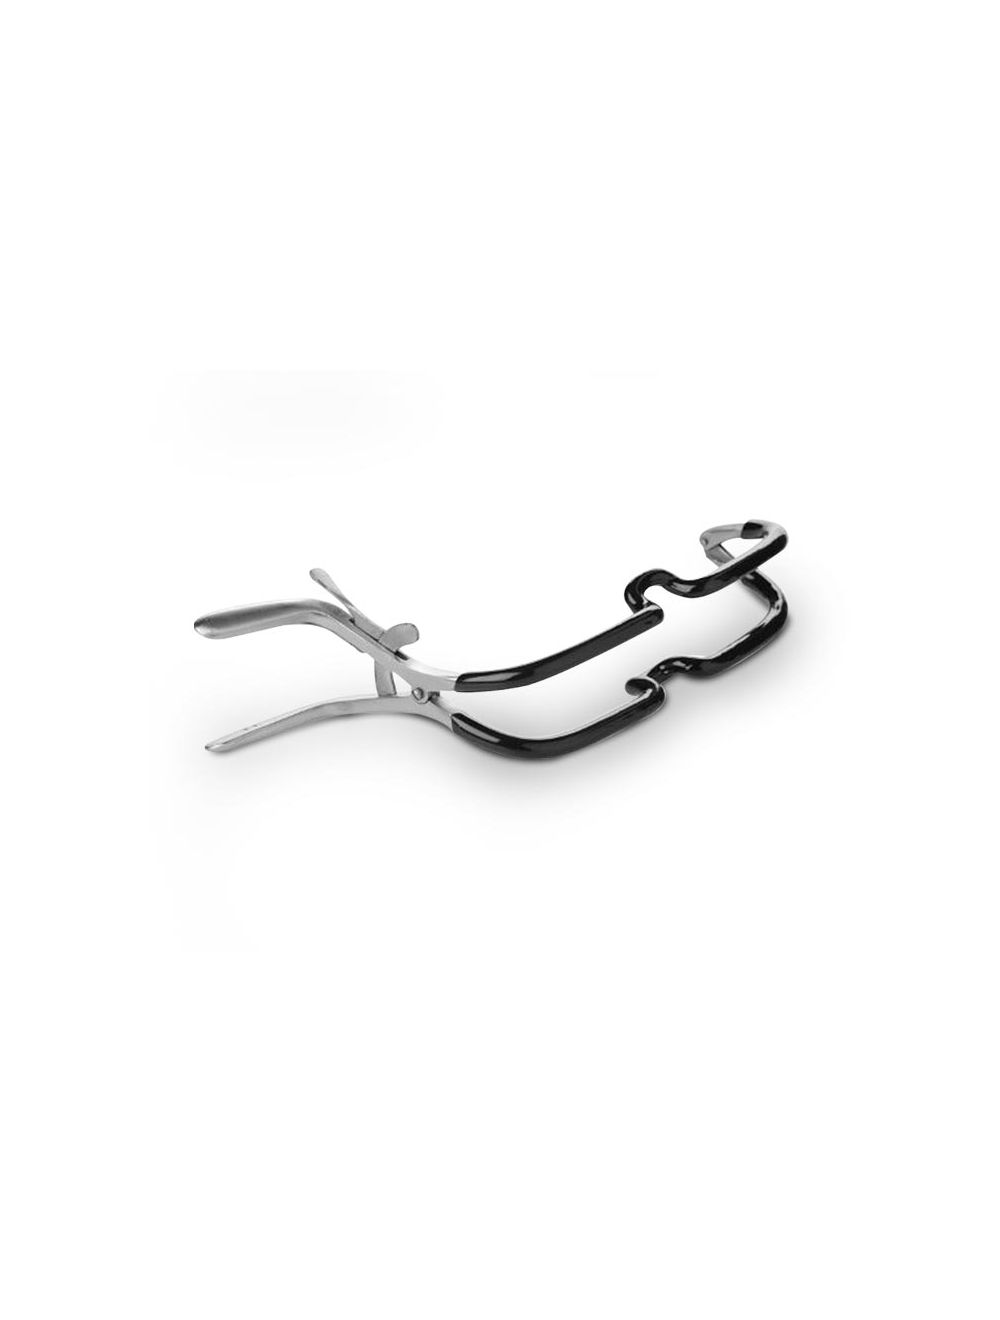 Black Label Jennings Mouth Gag With Rubber Coating